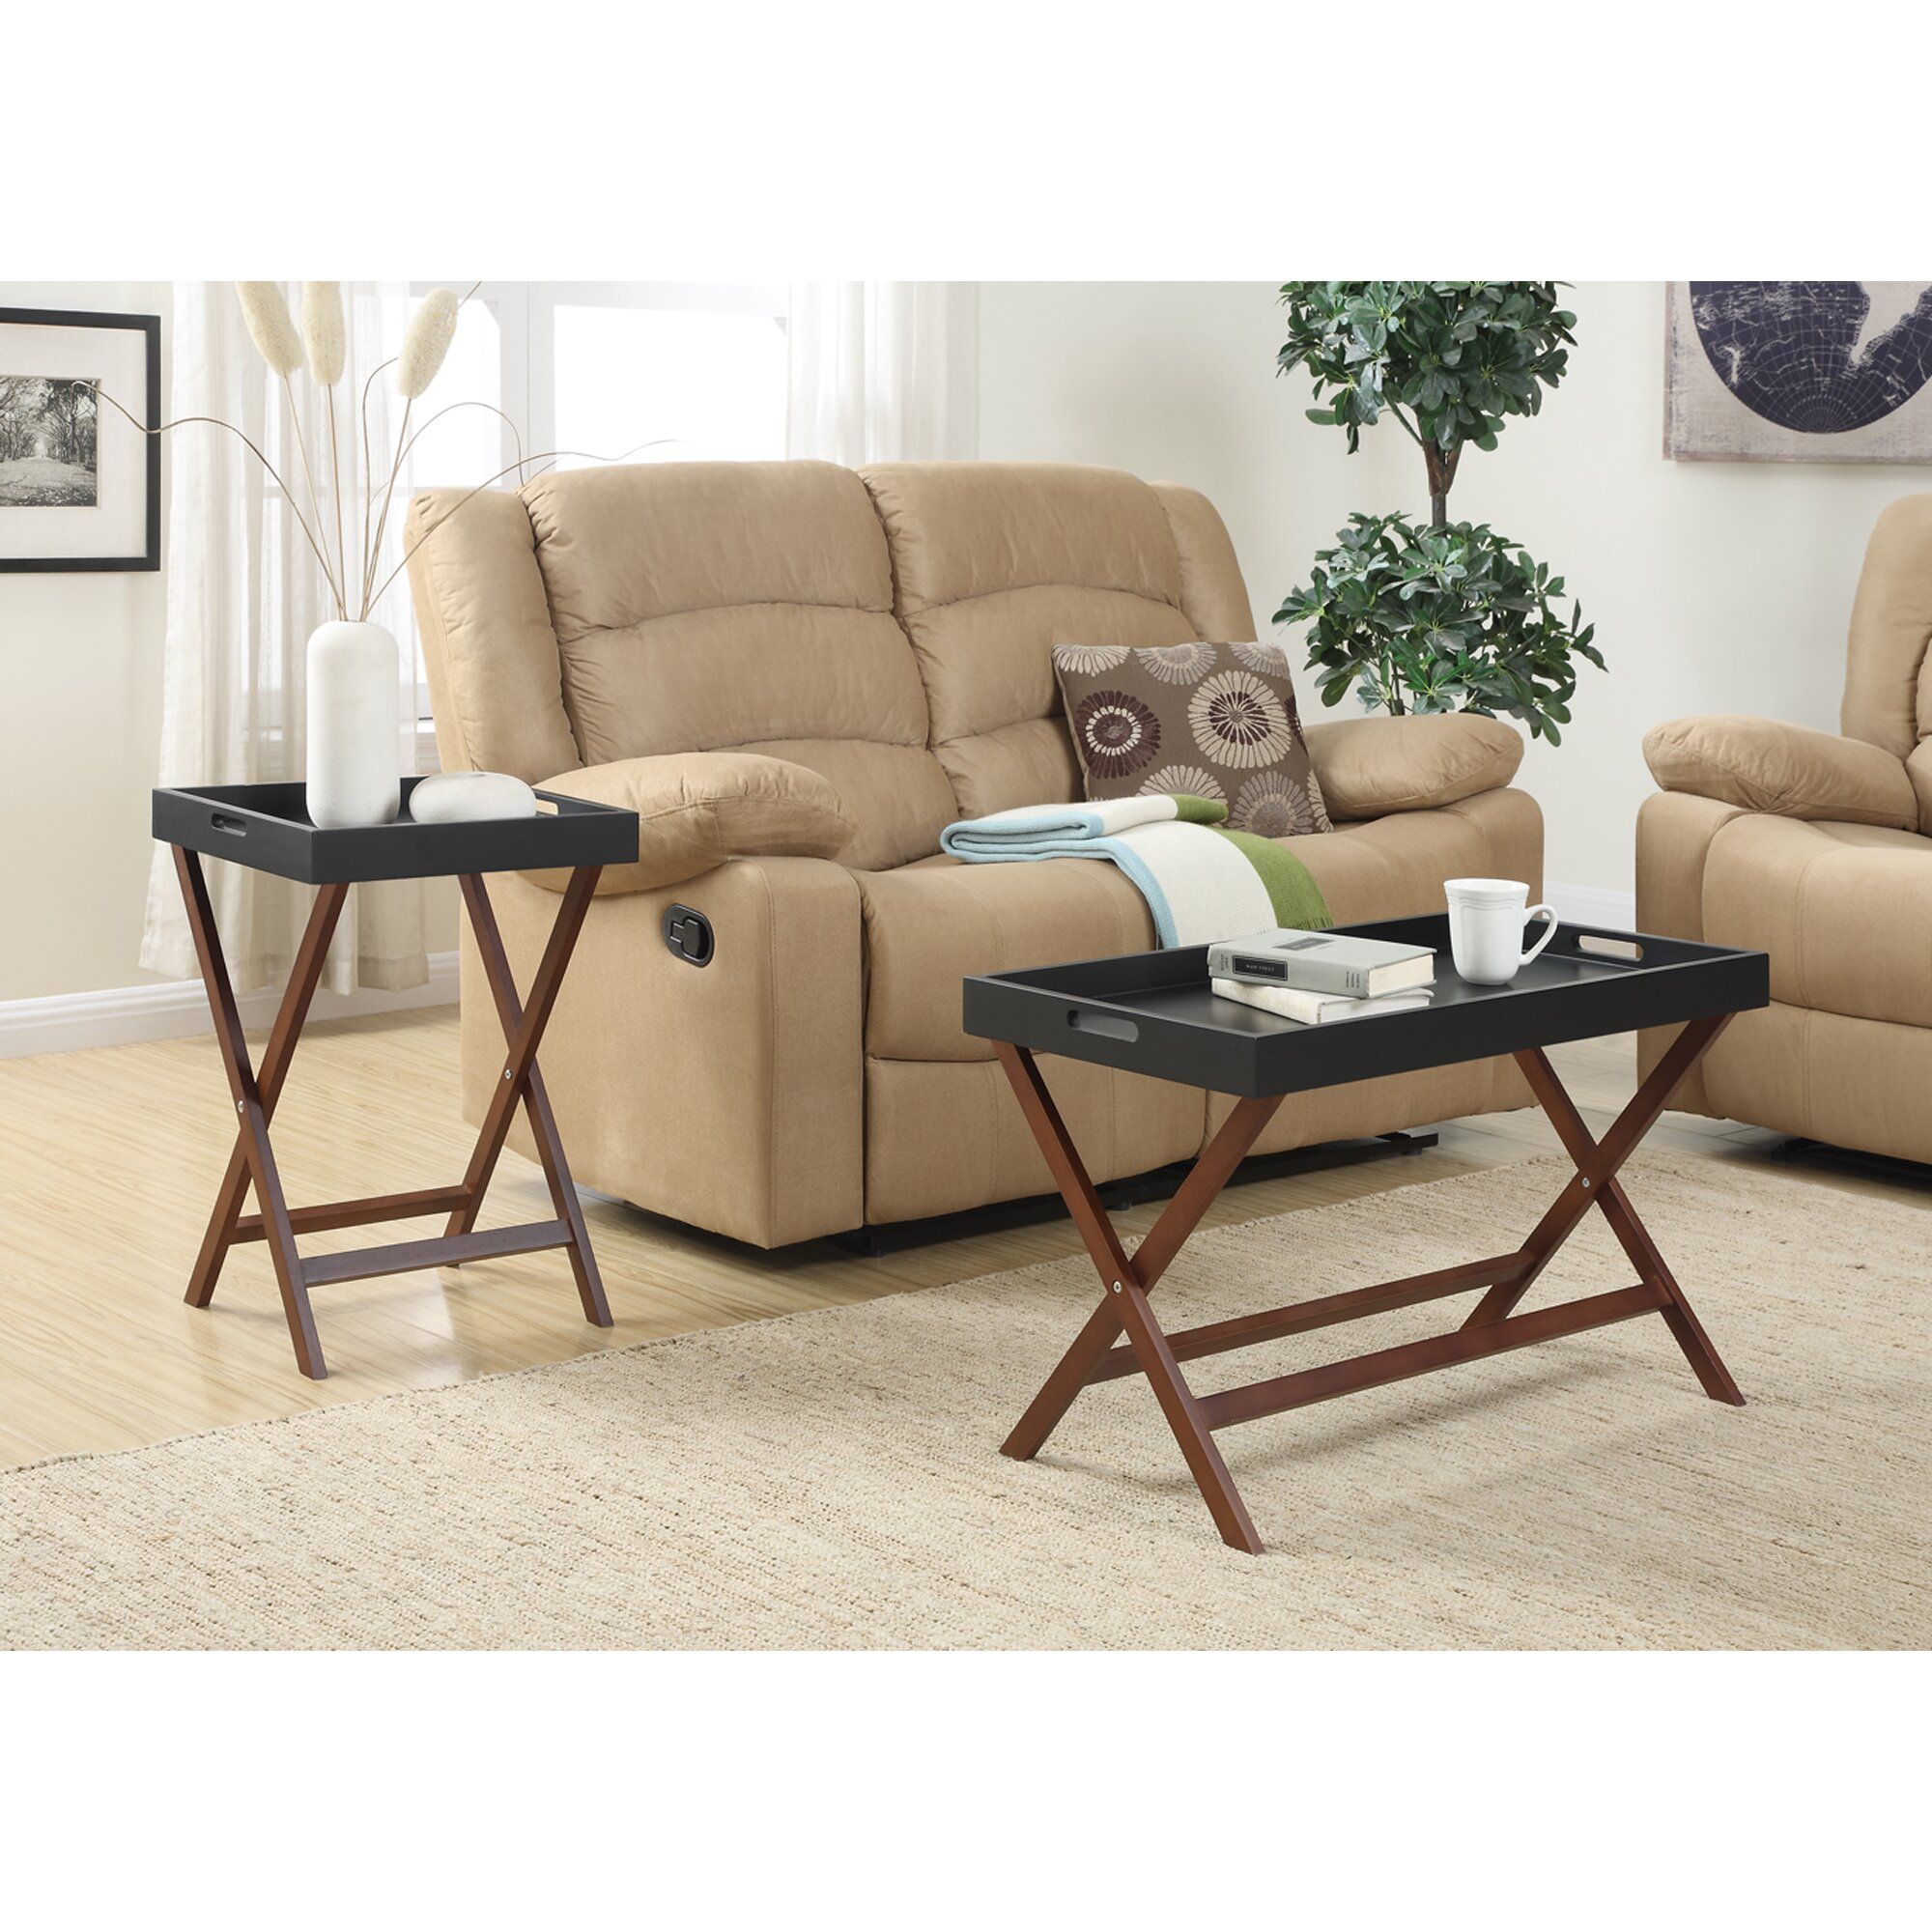 Lockheart Coffee Table With Removable Tray | Wayfair For Detachable Tray Coffee Tables (View 3 of 15)